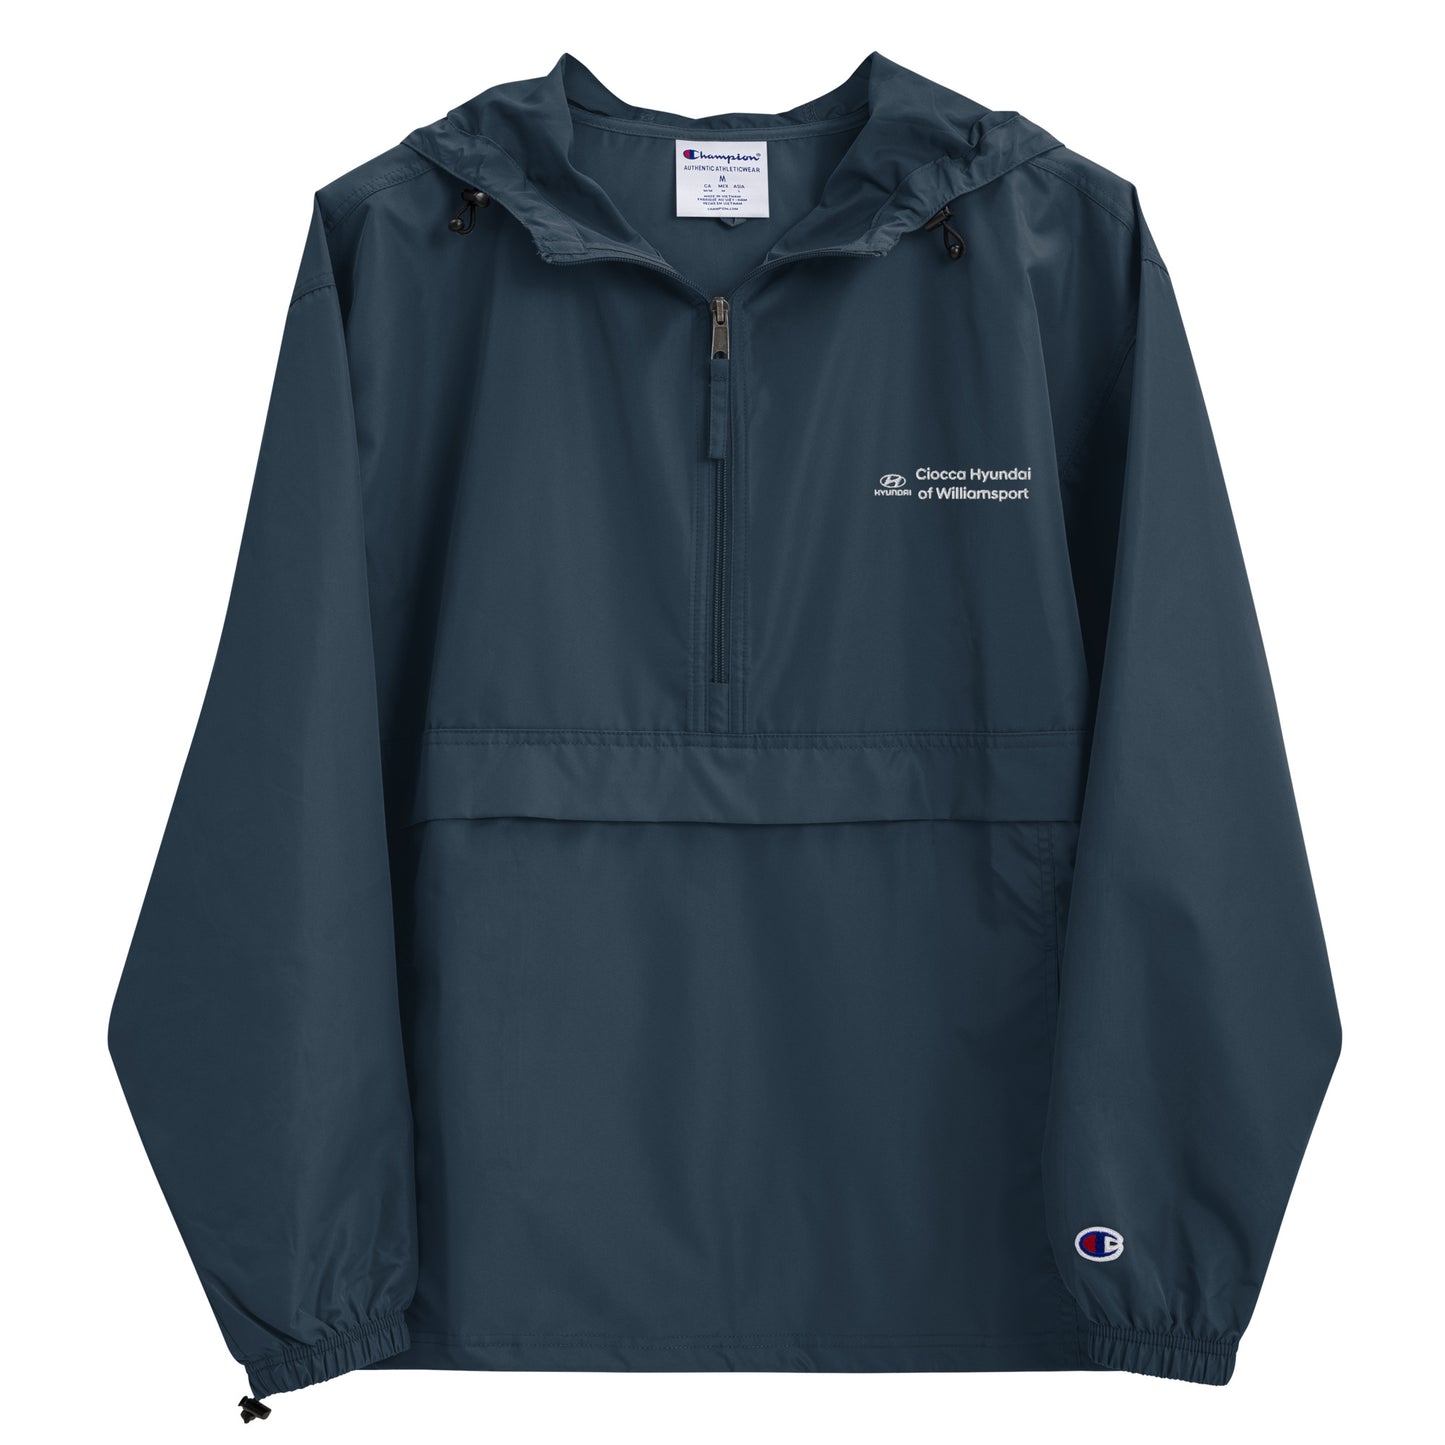 Champion | Embroidered Packable Jacket - Hyundai Williamsport